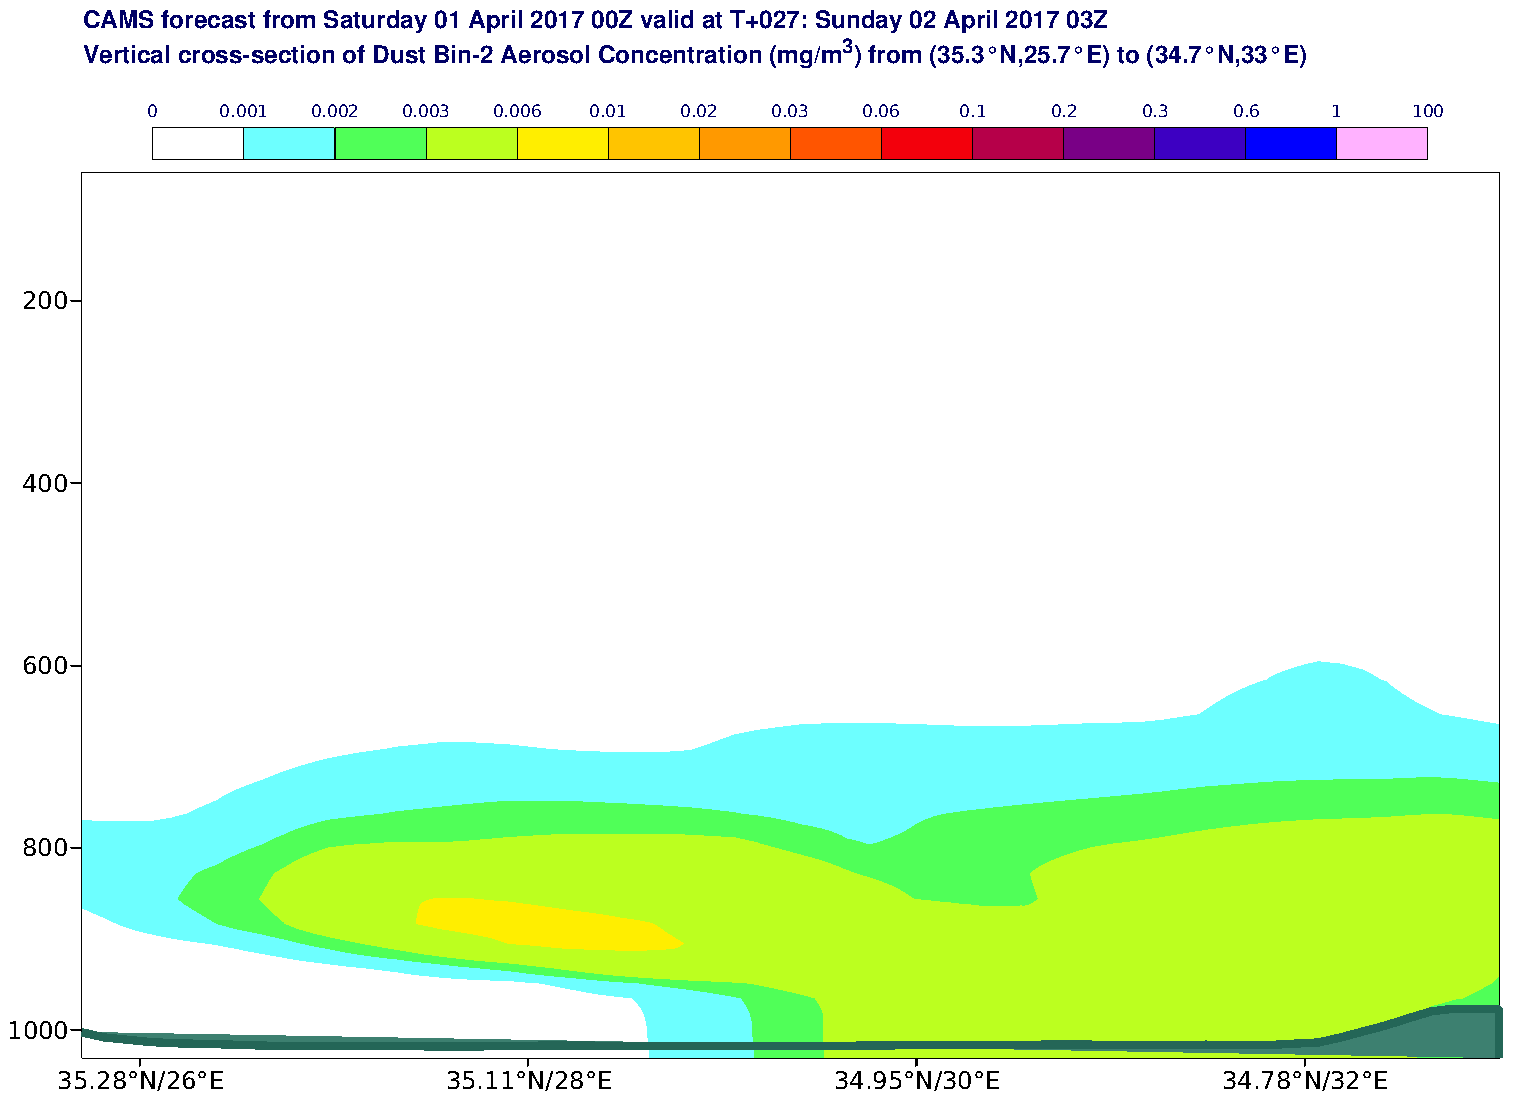 Vertical cross-section of Dust Bin-2 Aerosol Concentration (mg/m3) valid at T27 - 2017-04-02 03:00